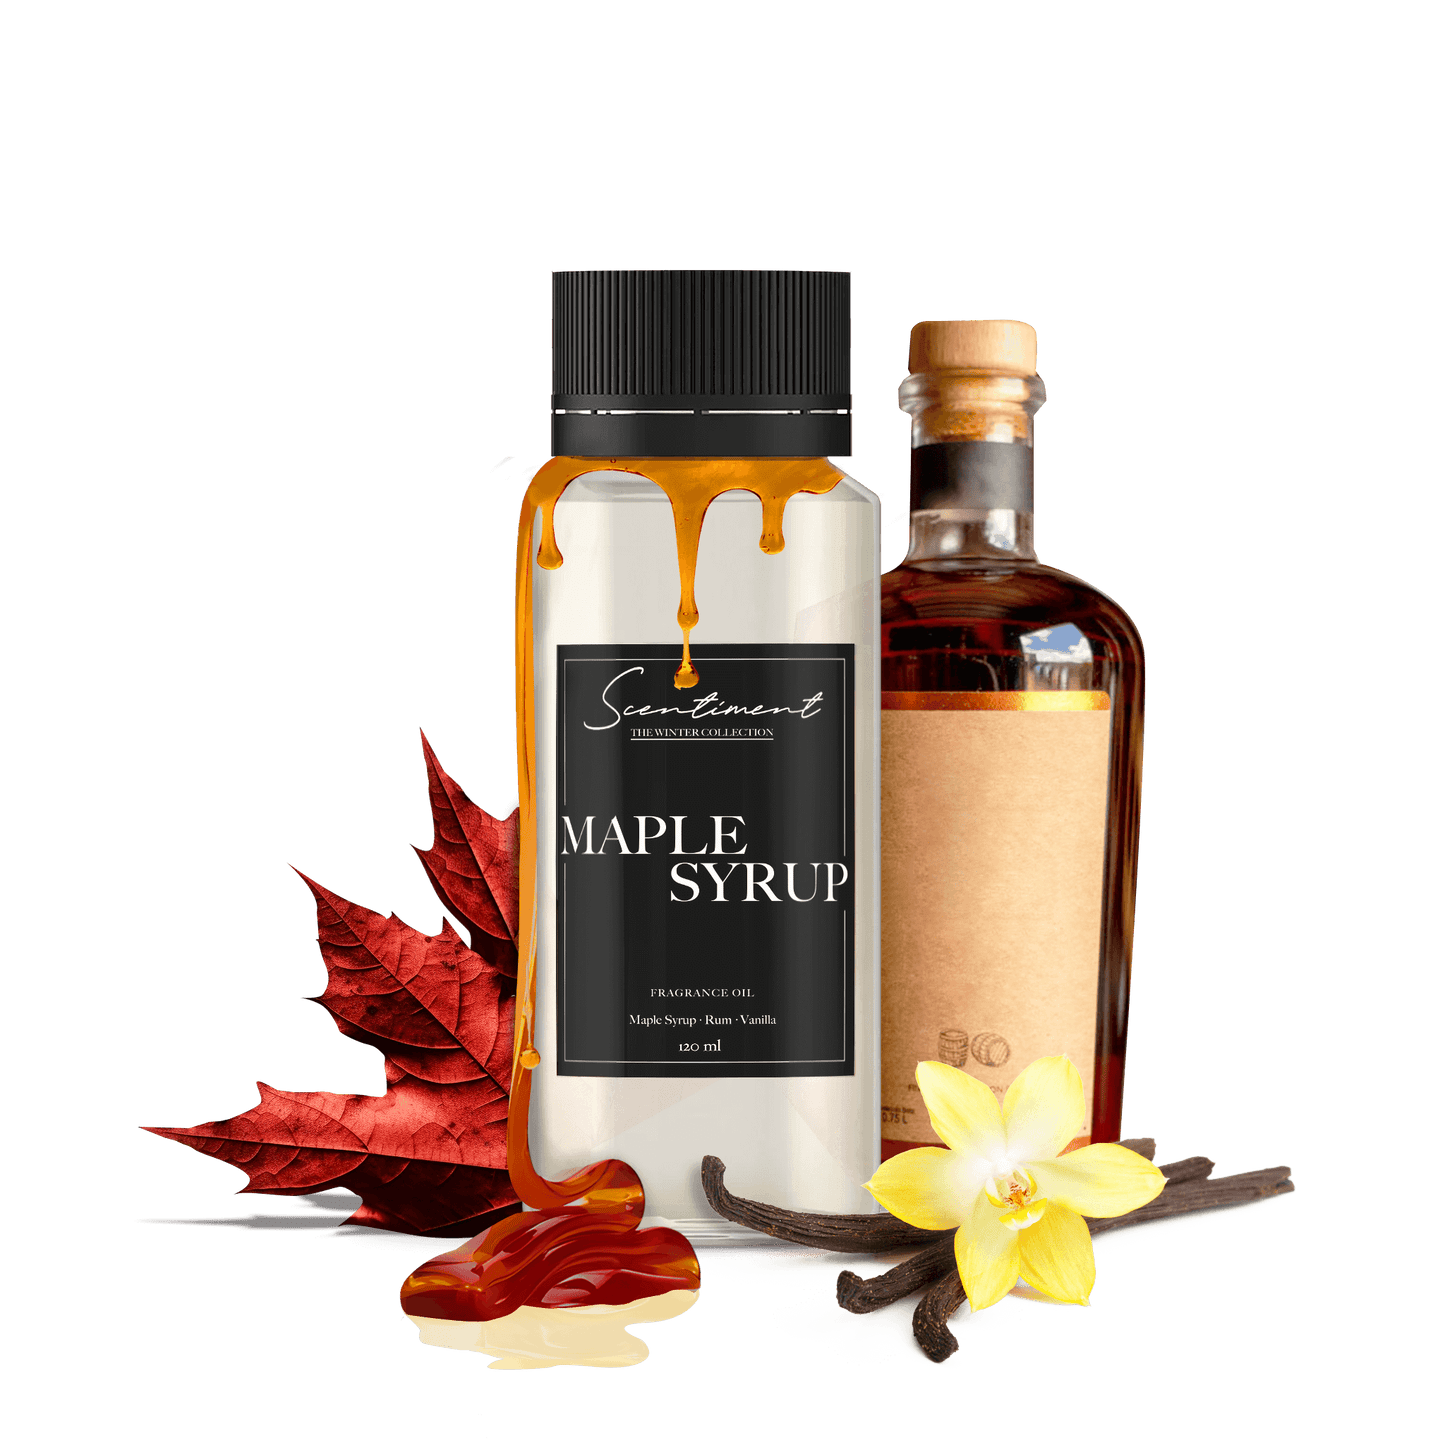 Maple Syrup Fragrance Oil with notes of Maple Syrup, Rum, and Vanilla.